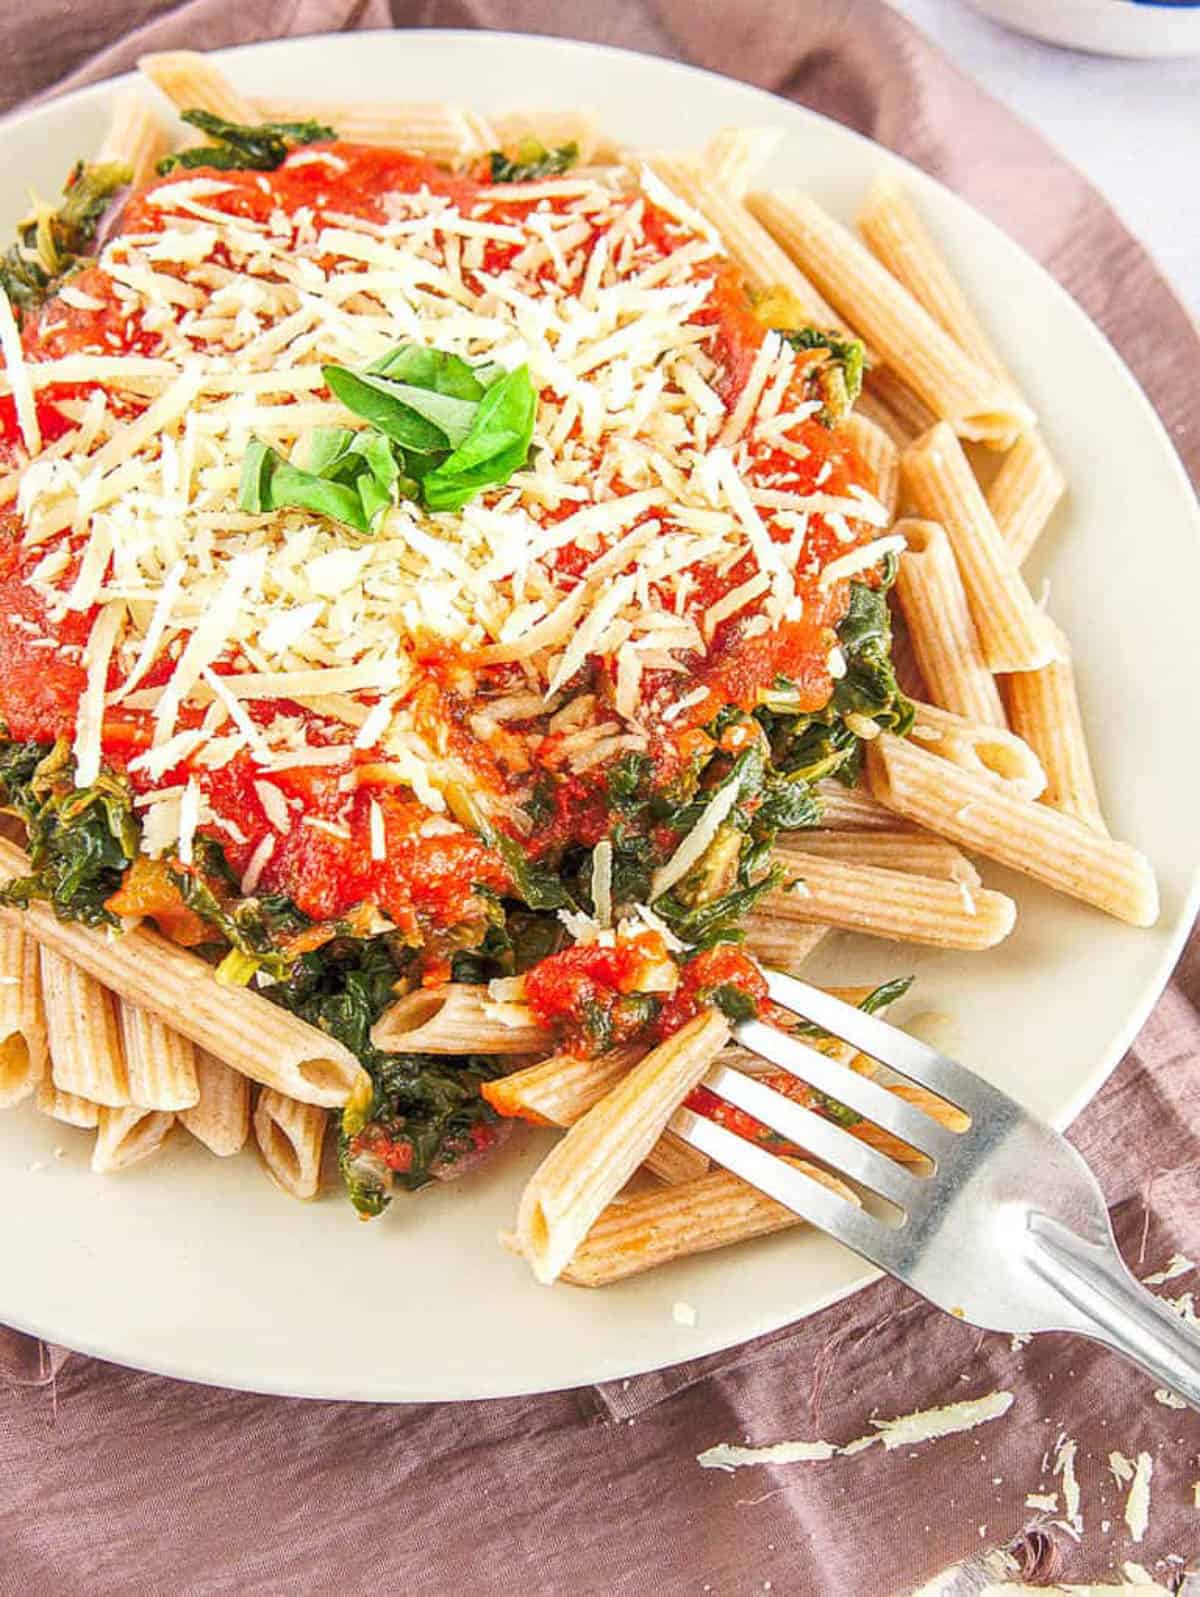 A large white dinner plate of whole wheat pasta with spinach and red sauce.